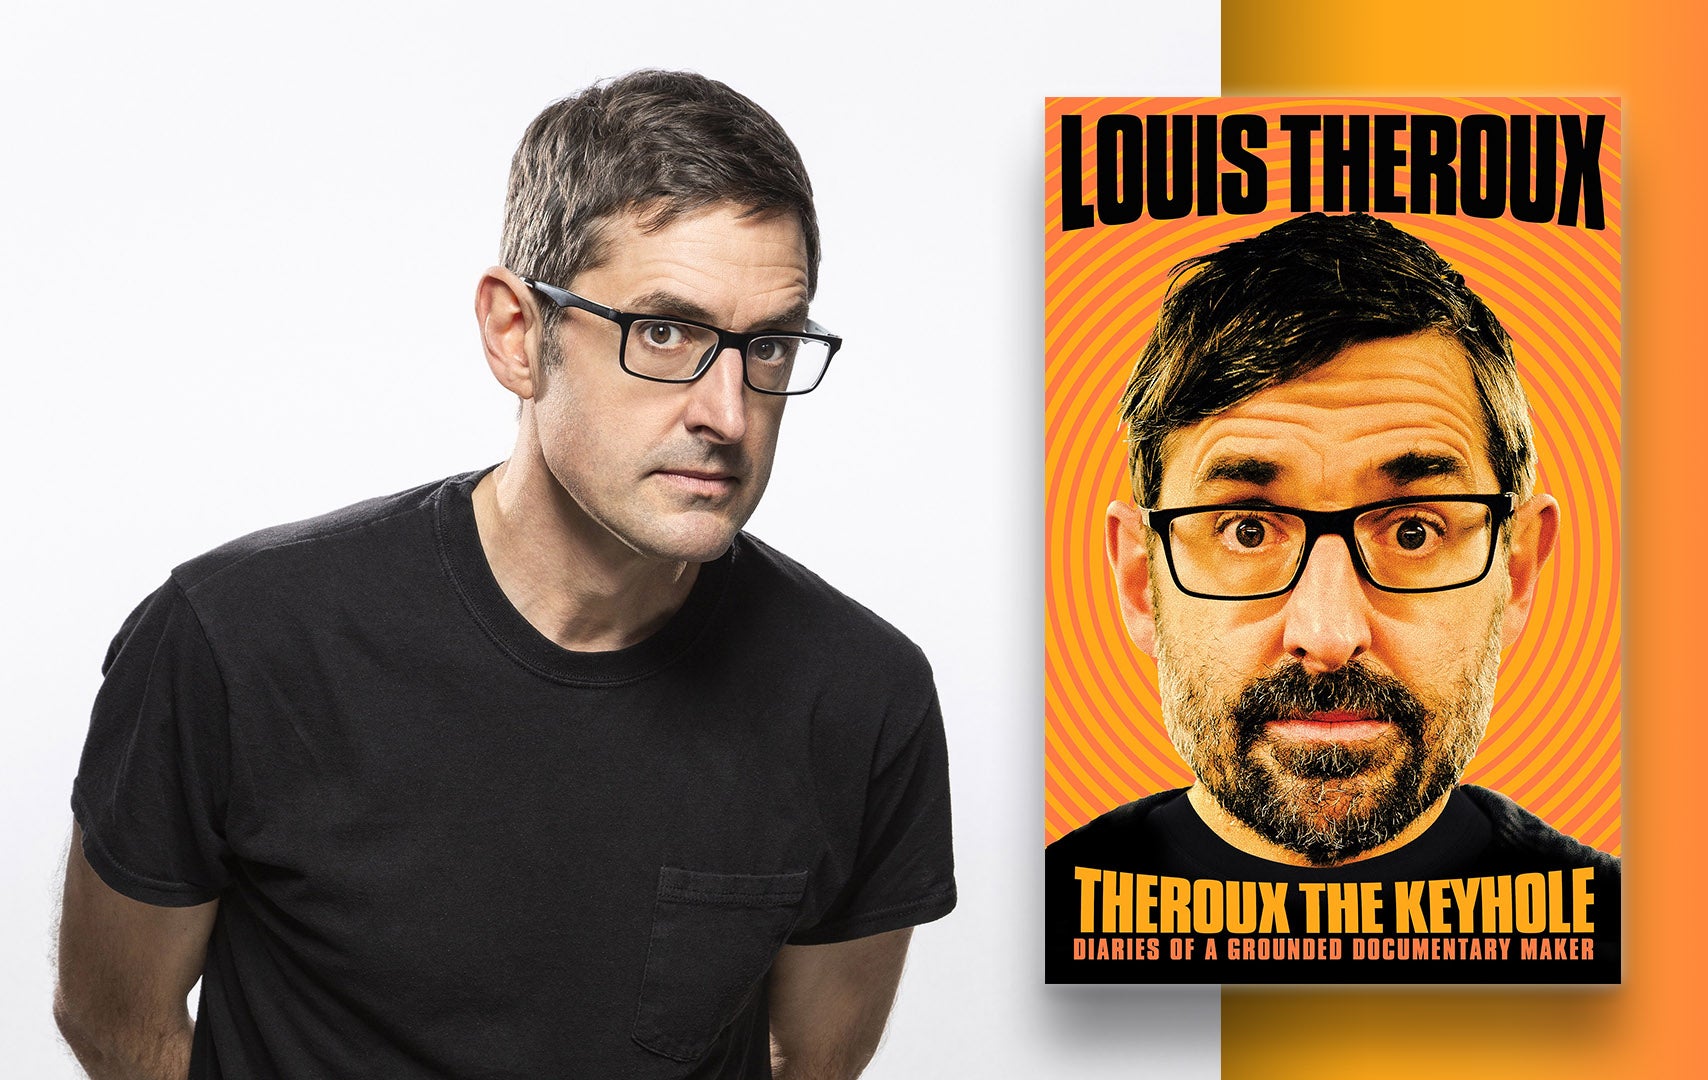 A picture of Louis Theroux next to his book, Theroux the Keyhole